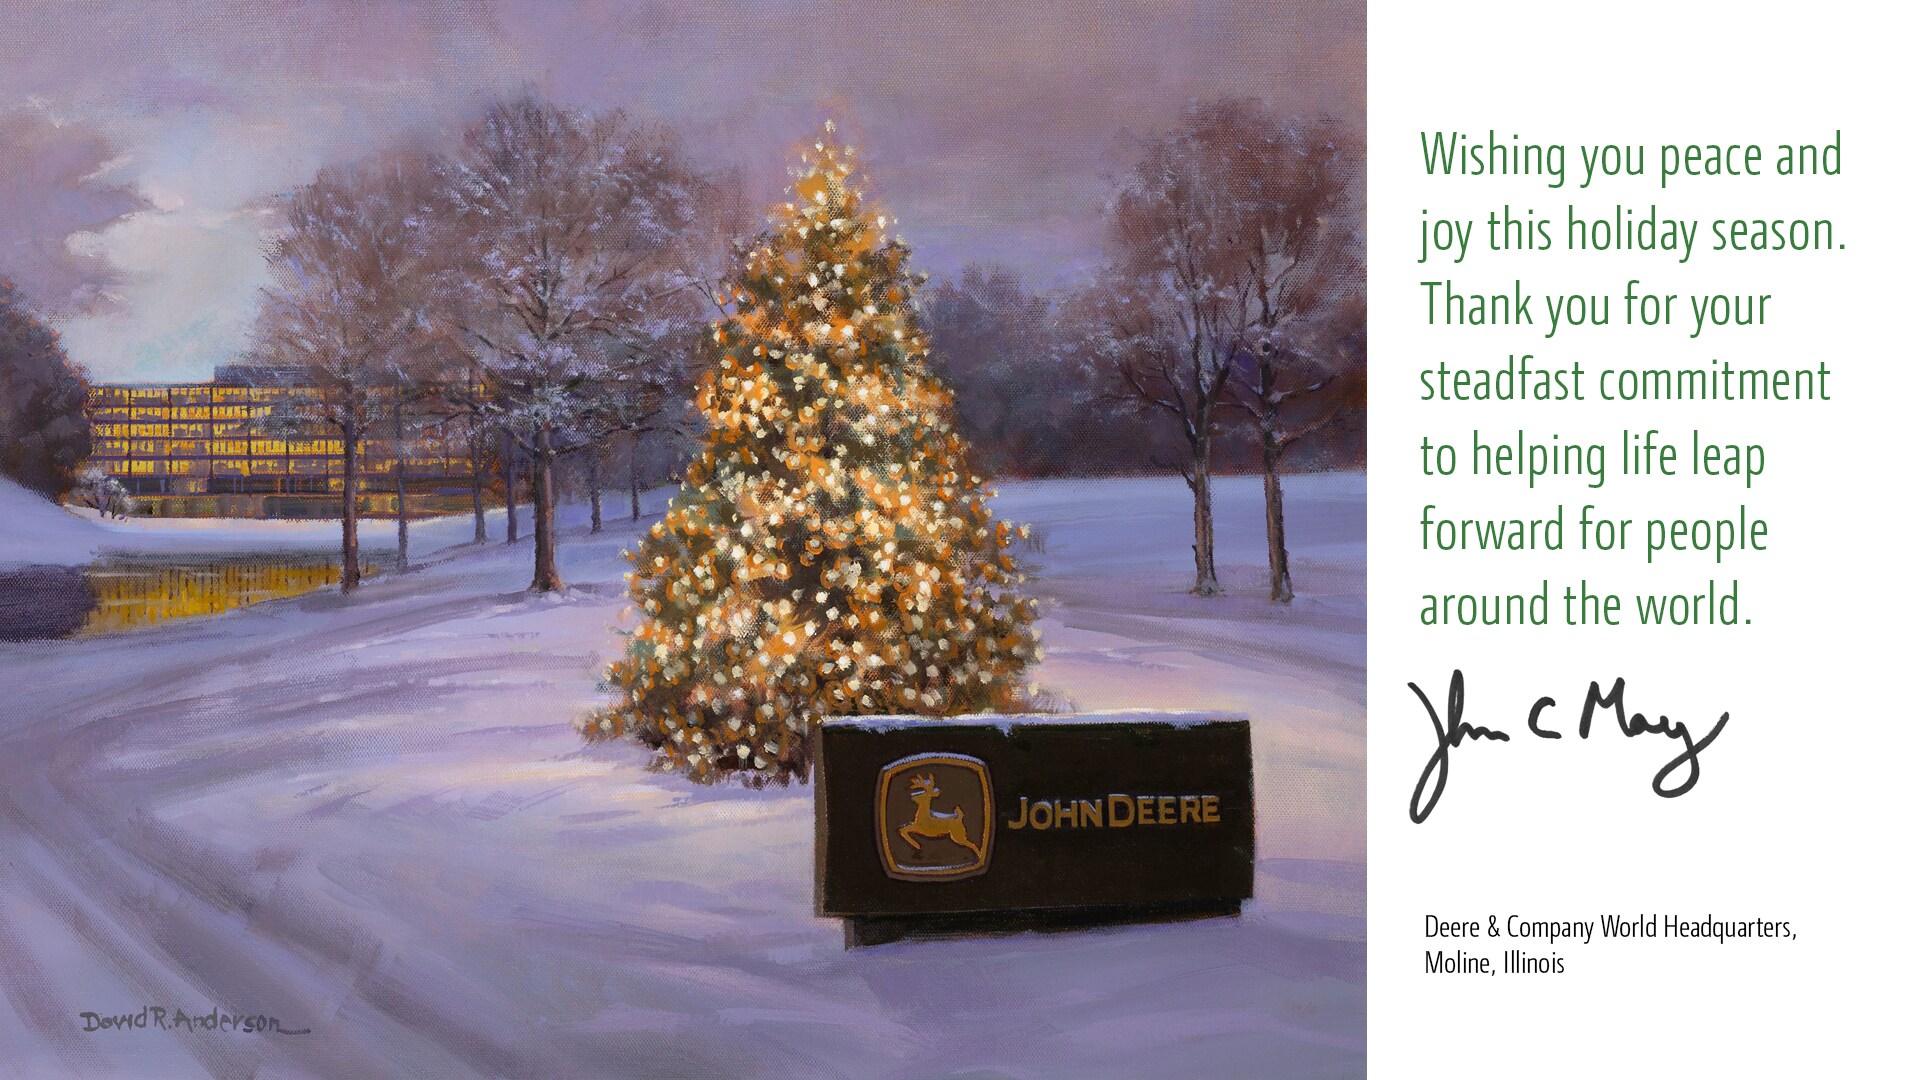 A painting of John Deere headquarters in Moline, IL with a brightly lit tree behind the John Deere sign